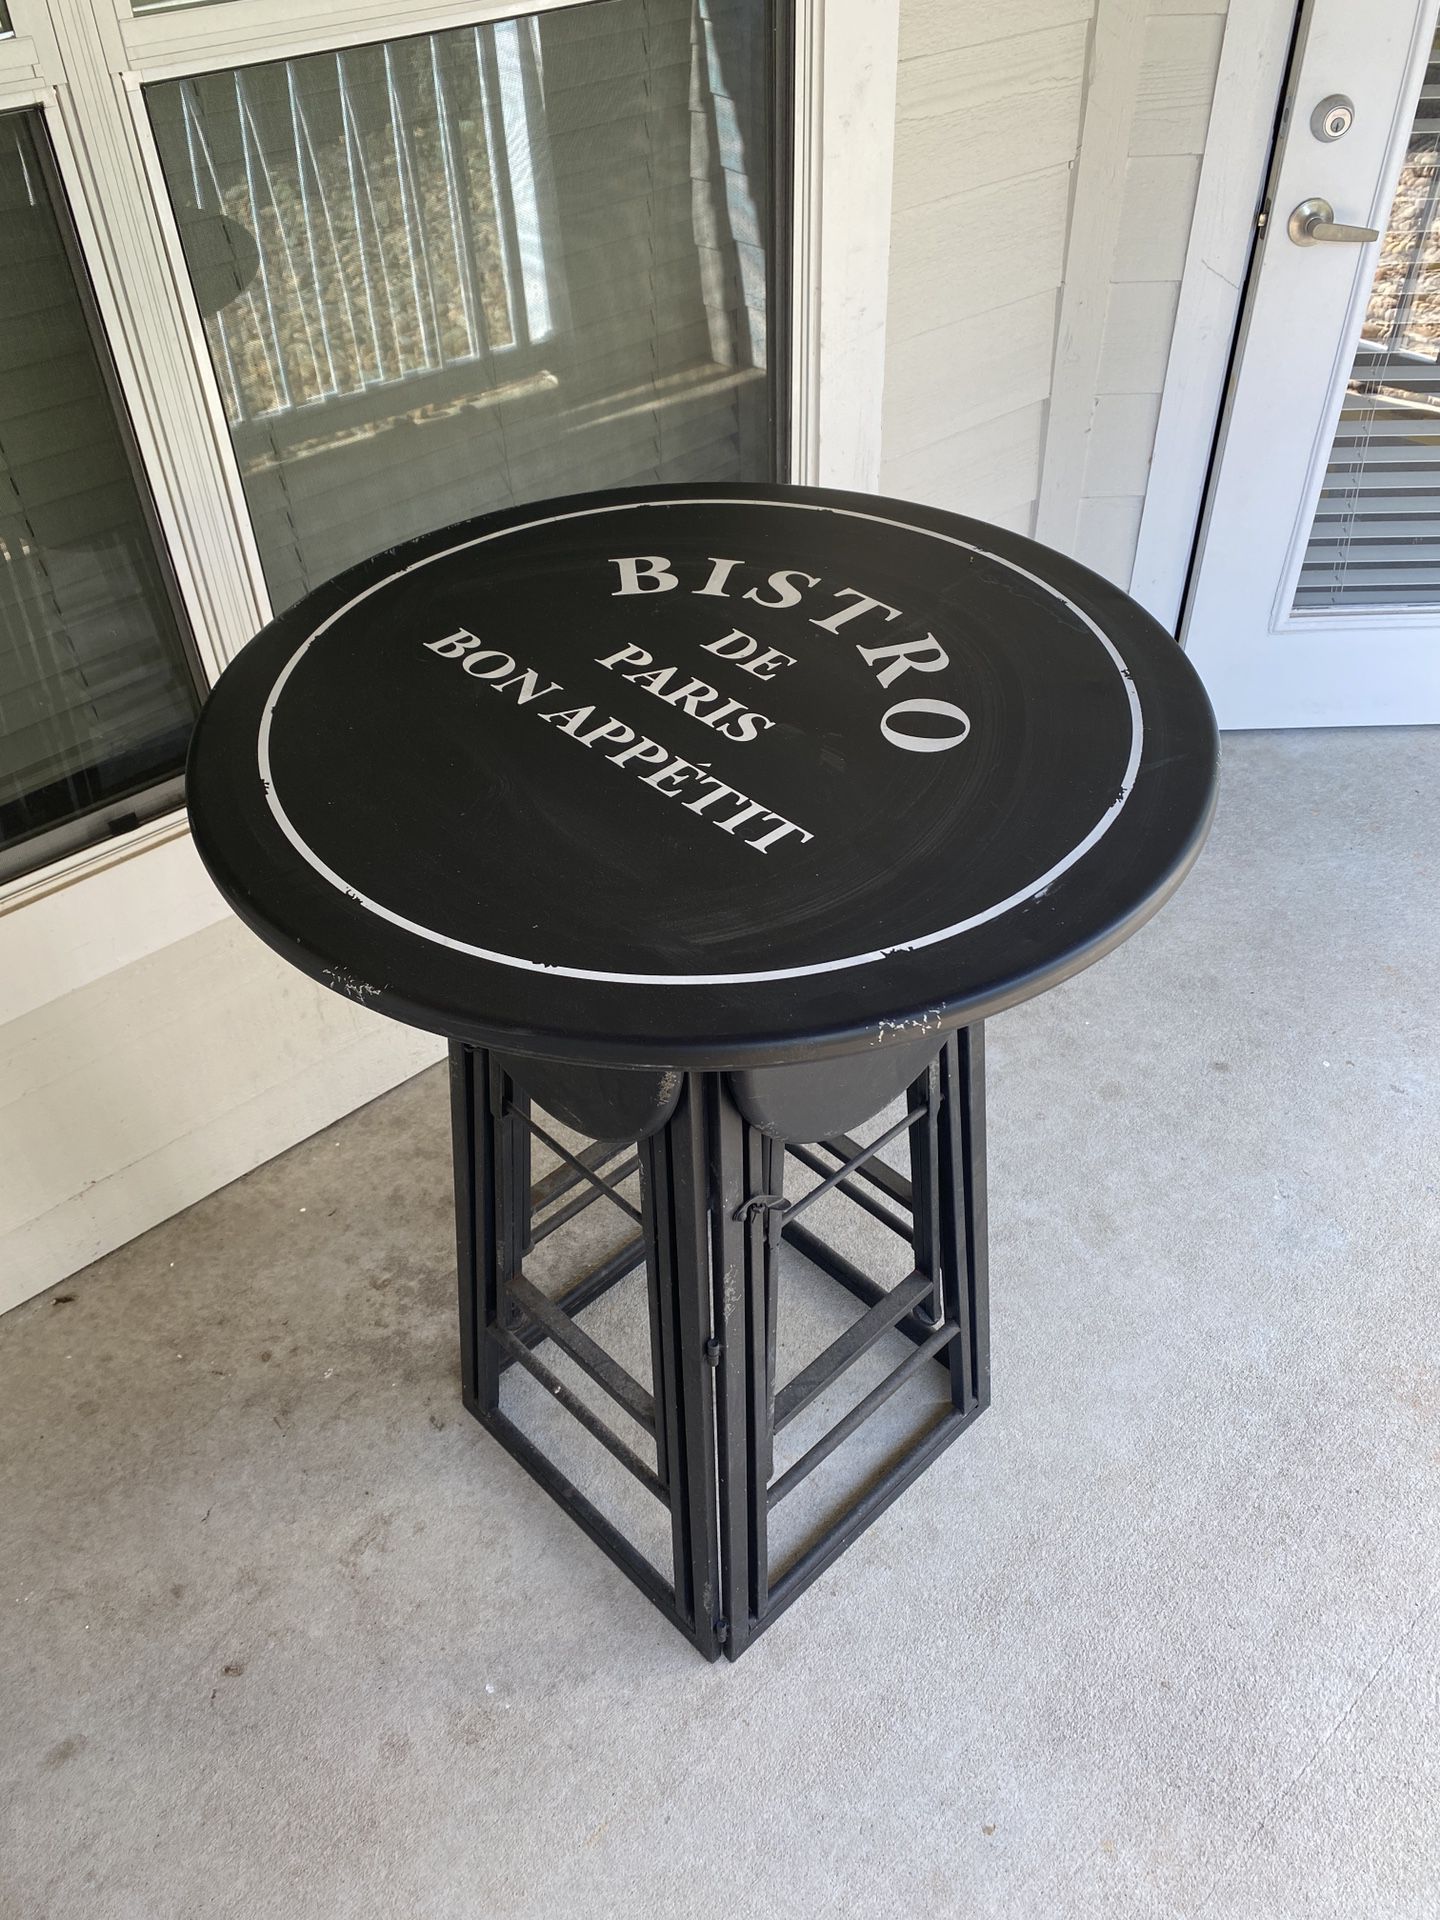 Bistro Folding Metal Table with Four Stools